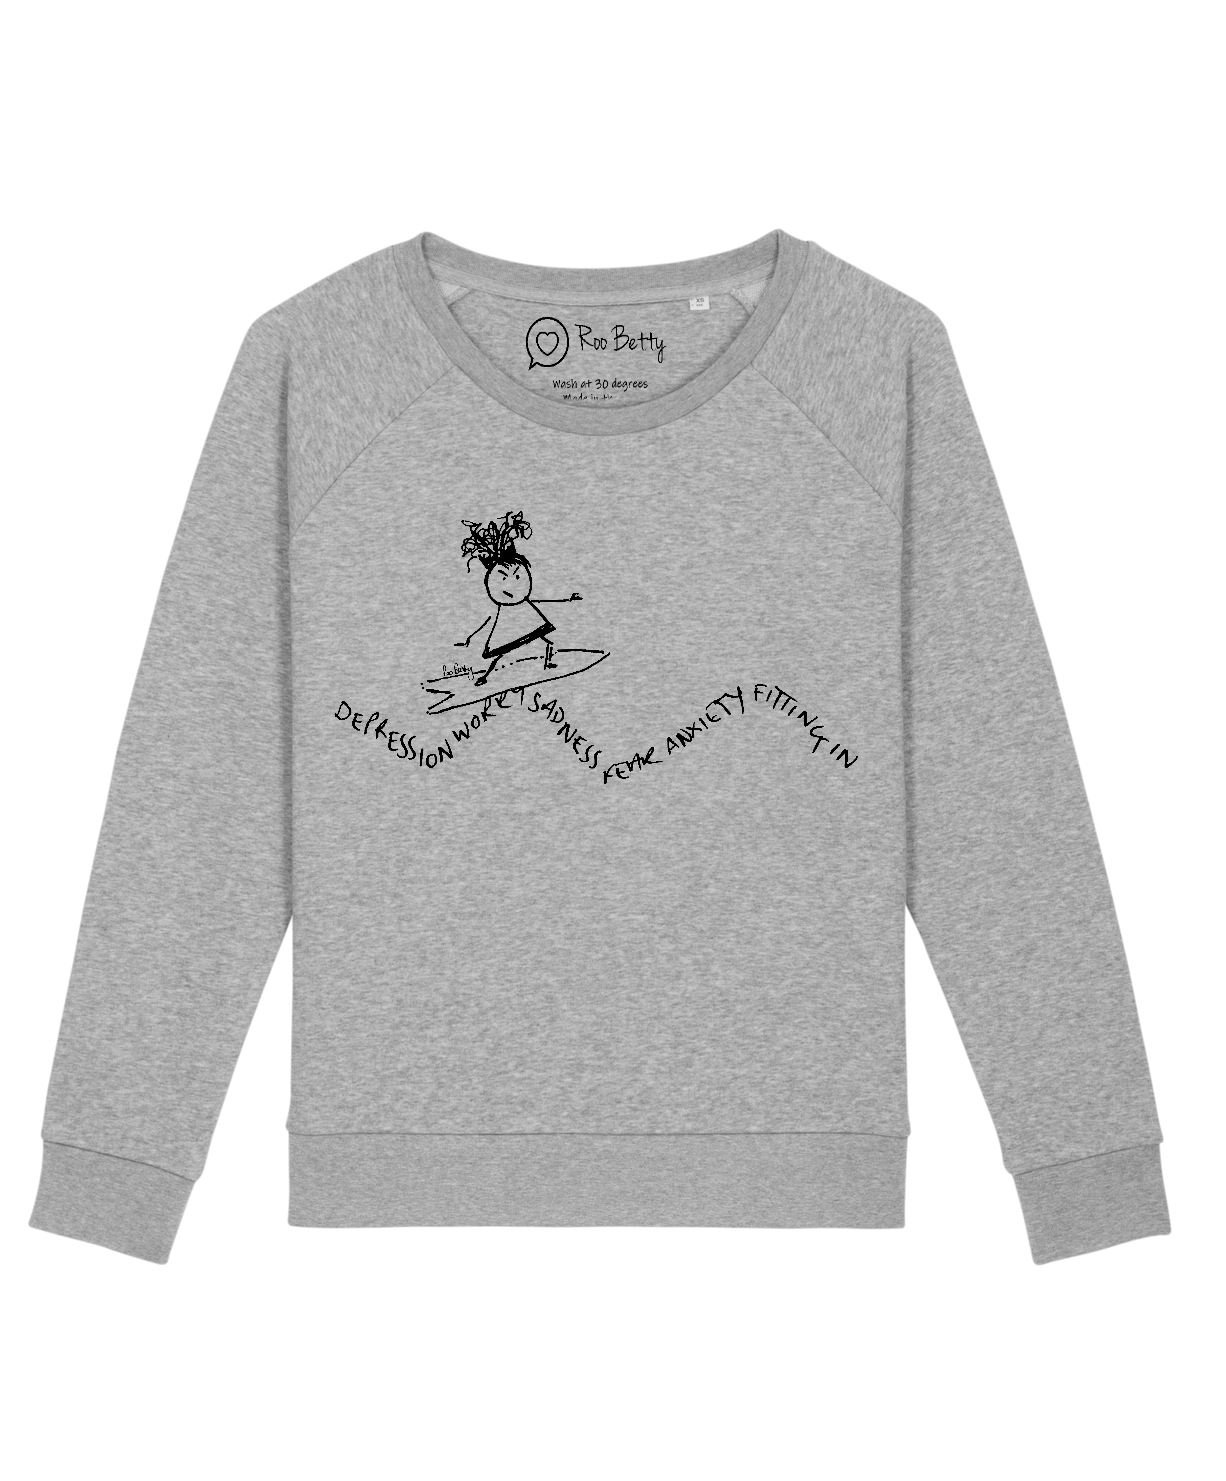 Organic Cotton and recycled polyester grey sweatshirt with Roo Betty cartoon of a girl on a surf board the waves are depicted as black ink words - sadness, depression, anxiety, from the Jon Kabat Zin quote, 'You can't stop the waves, but you can learn to surf' 